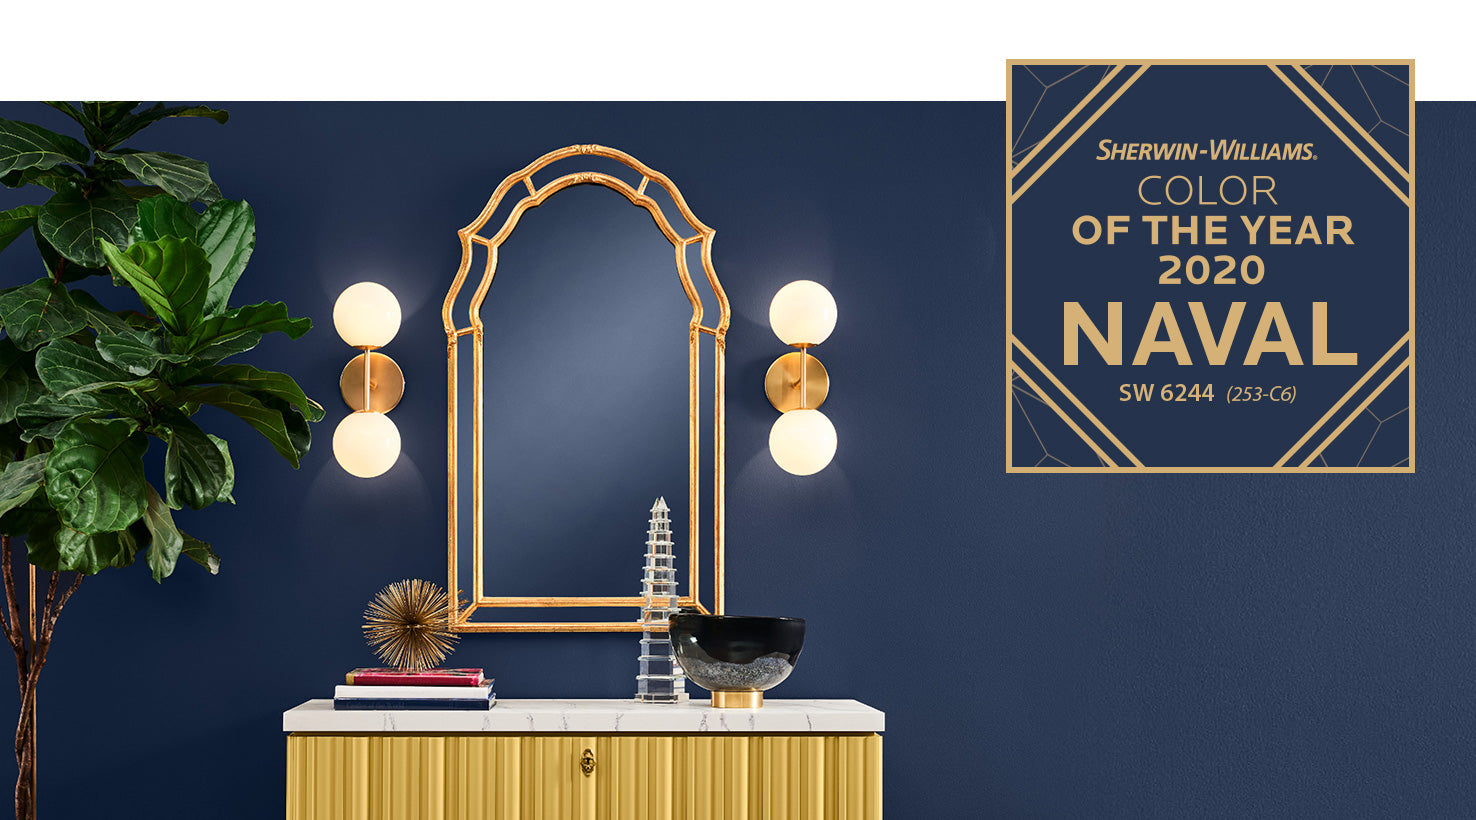 How to Use Sherwin-Williams’ 2020 Color of the Year in Your Home